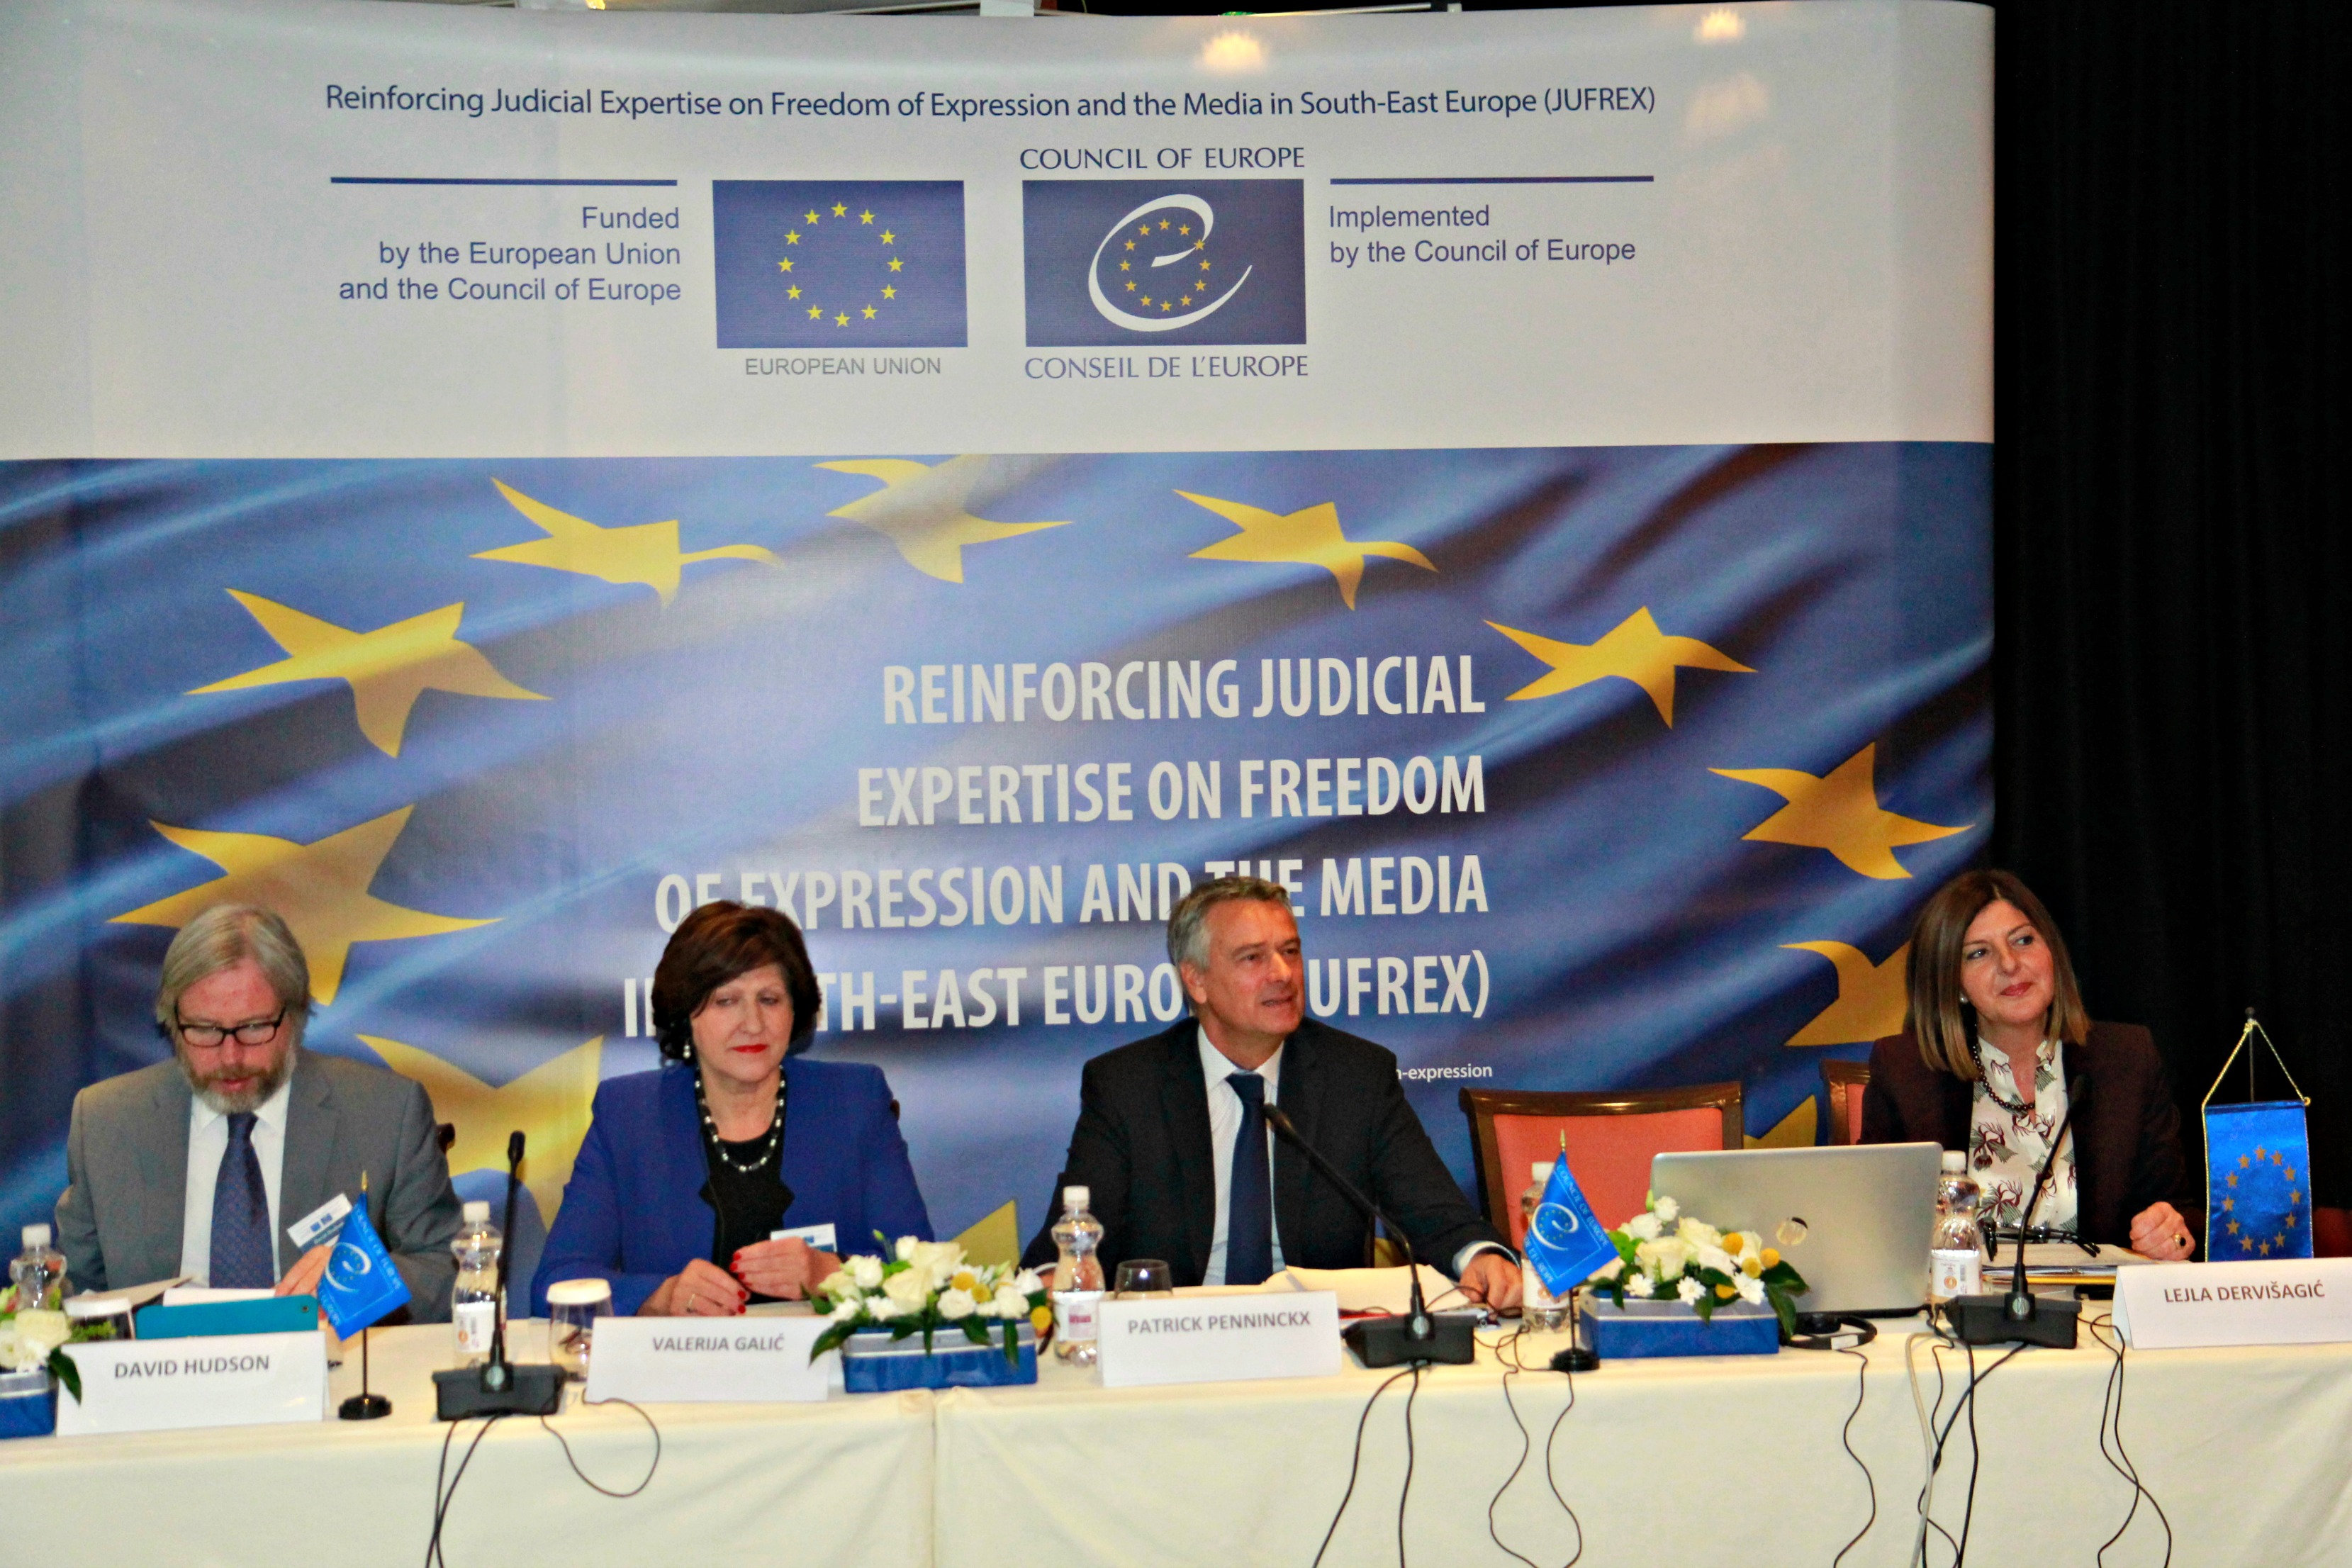 The Council of Europe launches a new initiative to strengthen standards on freedom of expression and the media in South-East Europe